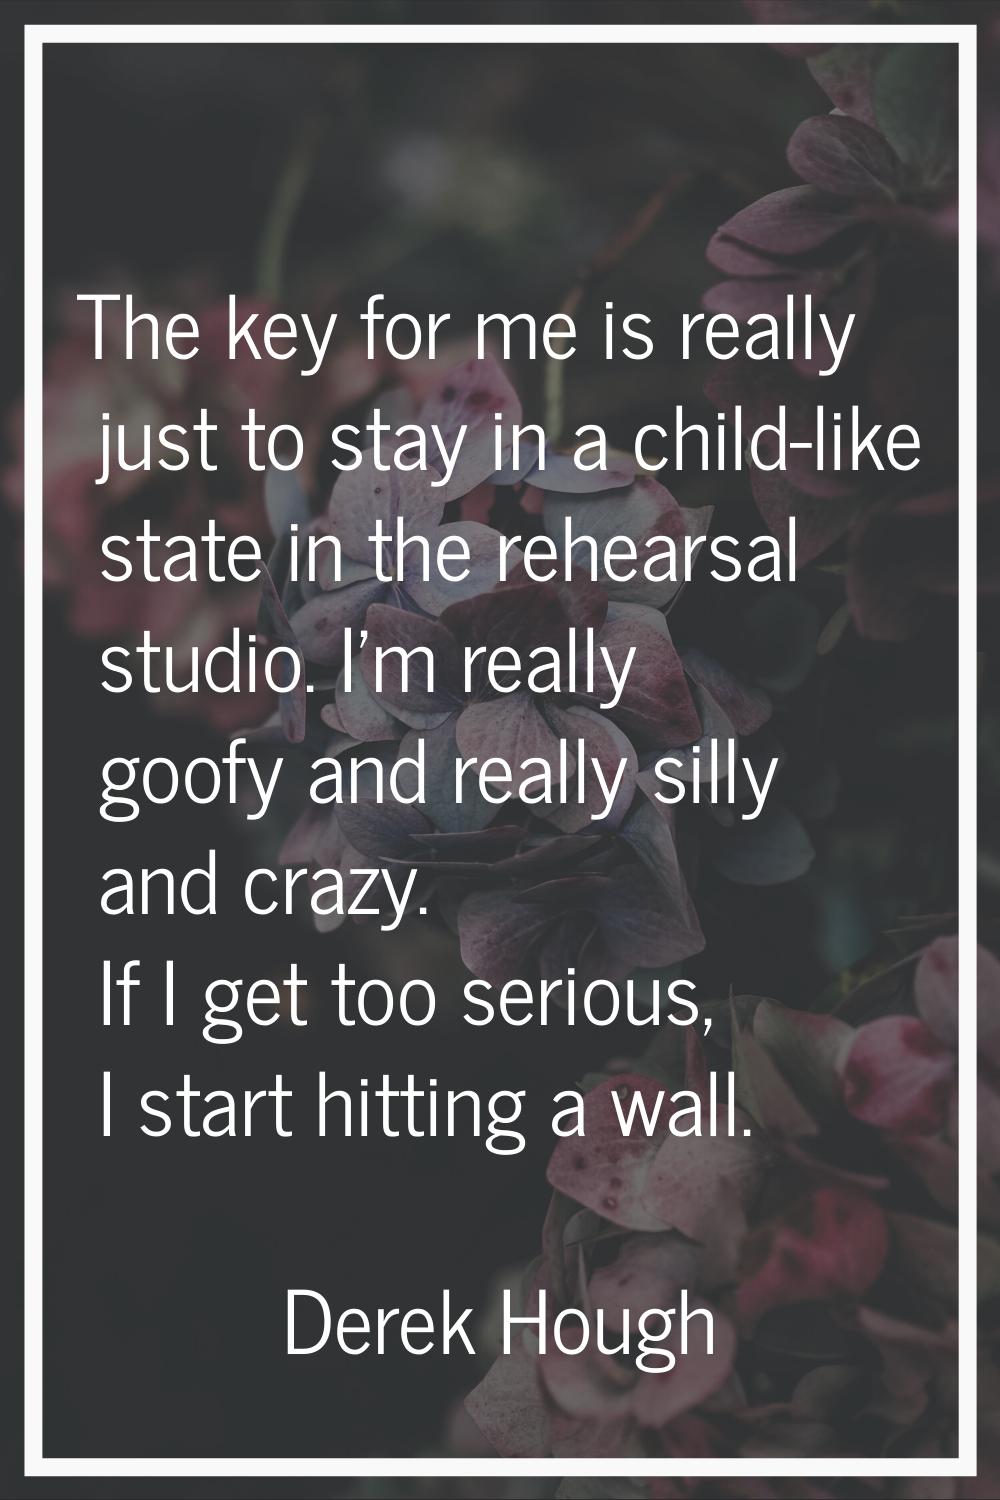 The key for me is really just to stay in a child-like state in the rehearsal studio. I'm really goo